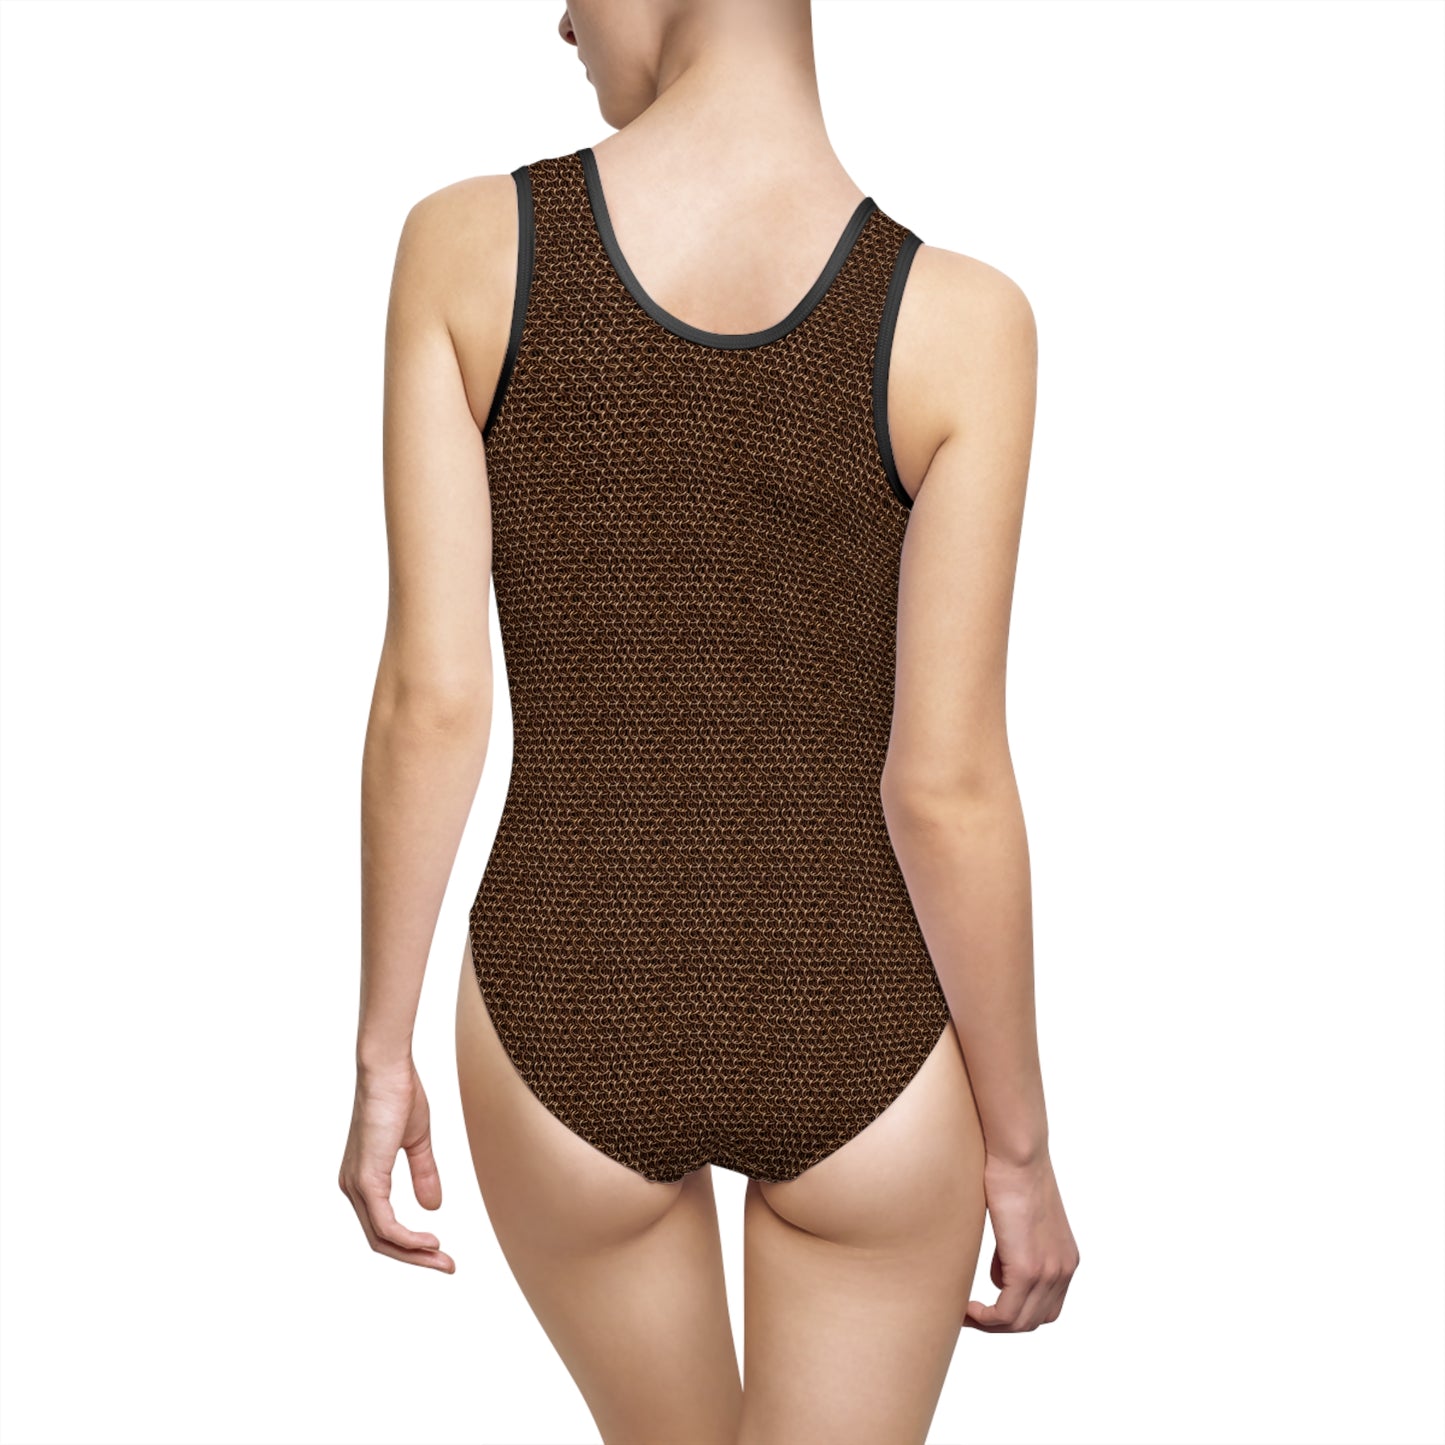 Women's Classic Bronze Chainmail One-Piece Swimsuit